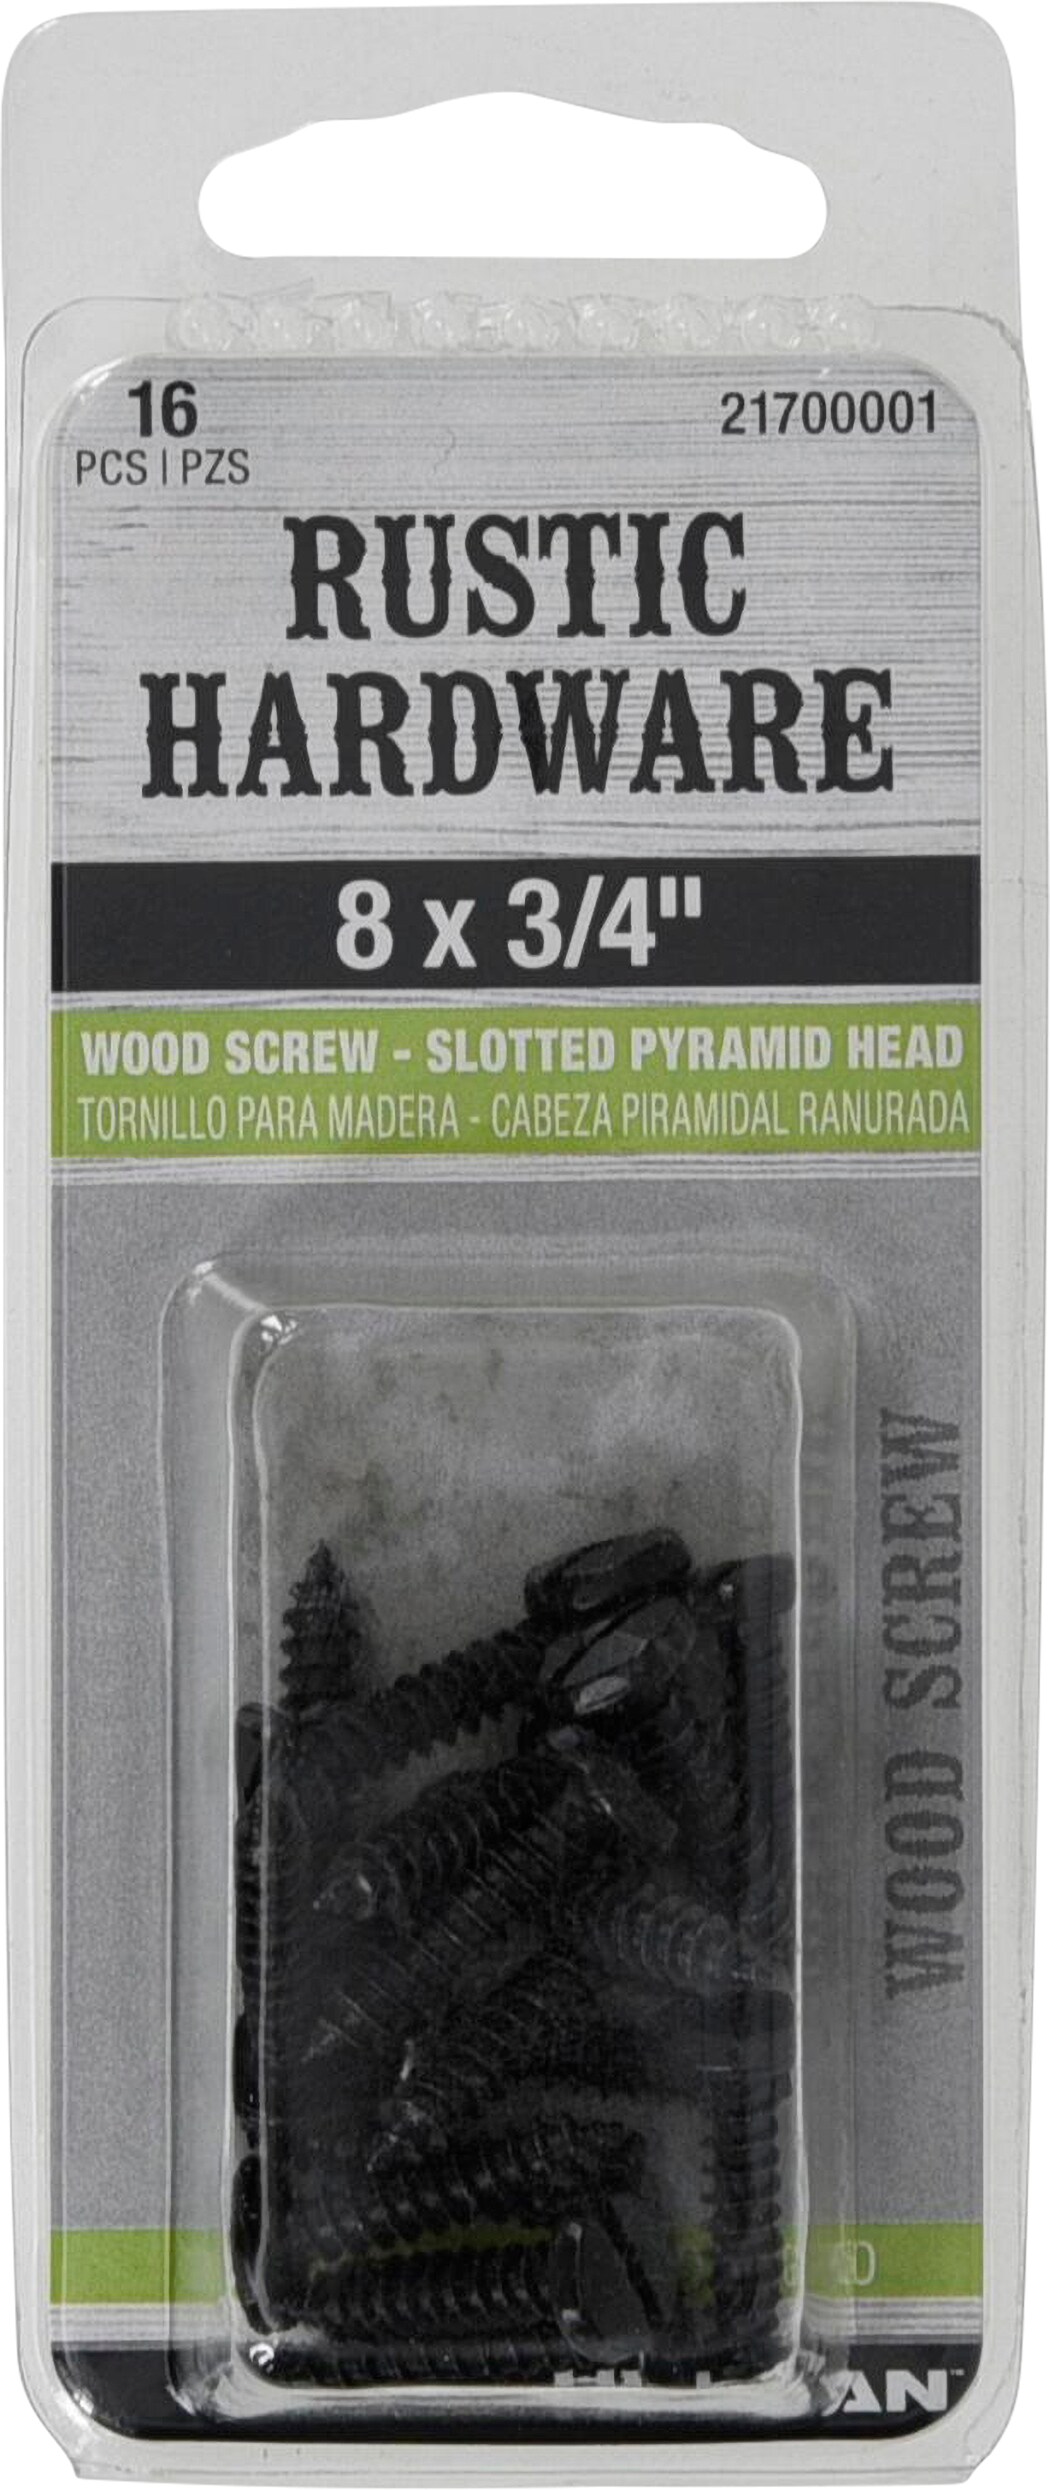 Rustic Pyramid Head Wood Screws #8 X 3/4 this is for a package of 100 